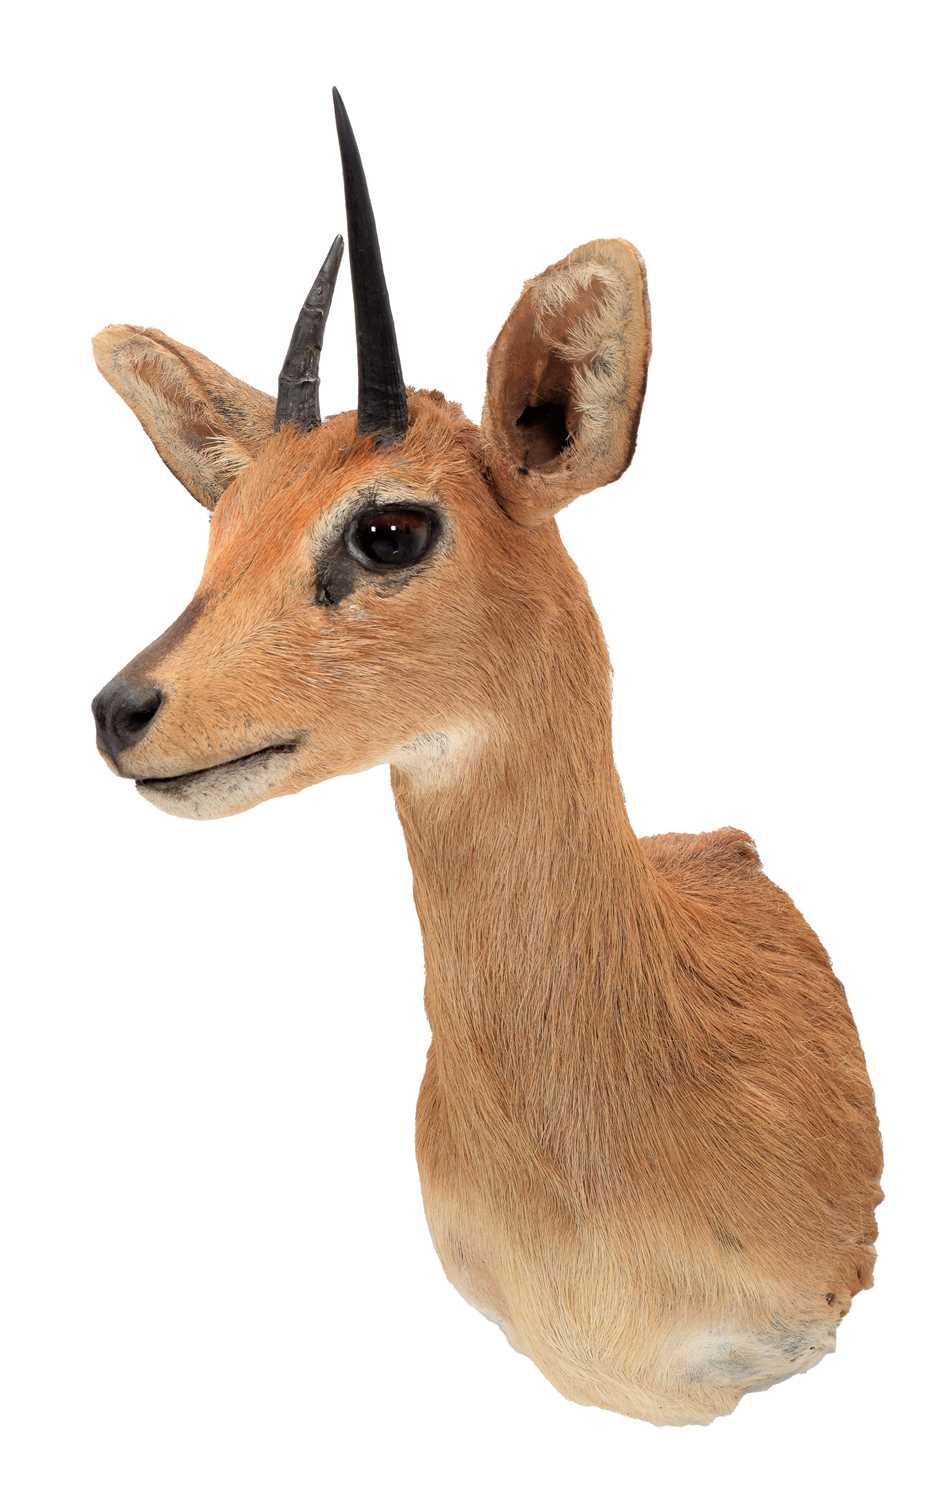 Taxidermy: South African Steenbok (Raphicerus campestris campestris), modern, South Africa, adult - Image 3 of 3